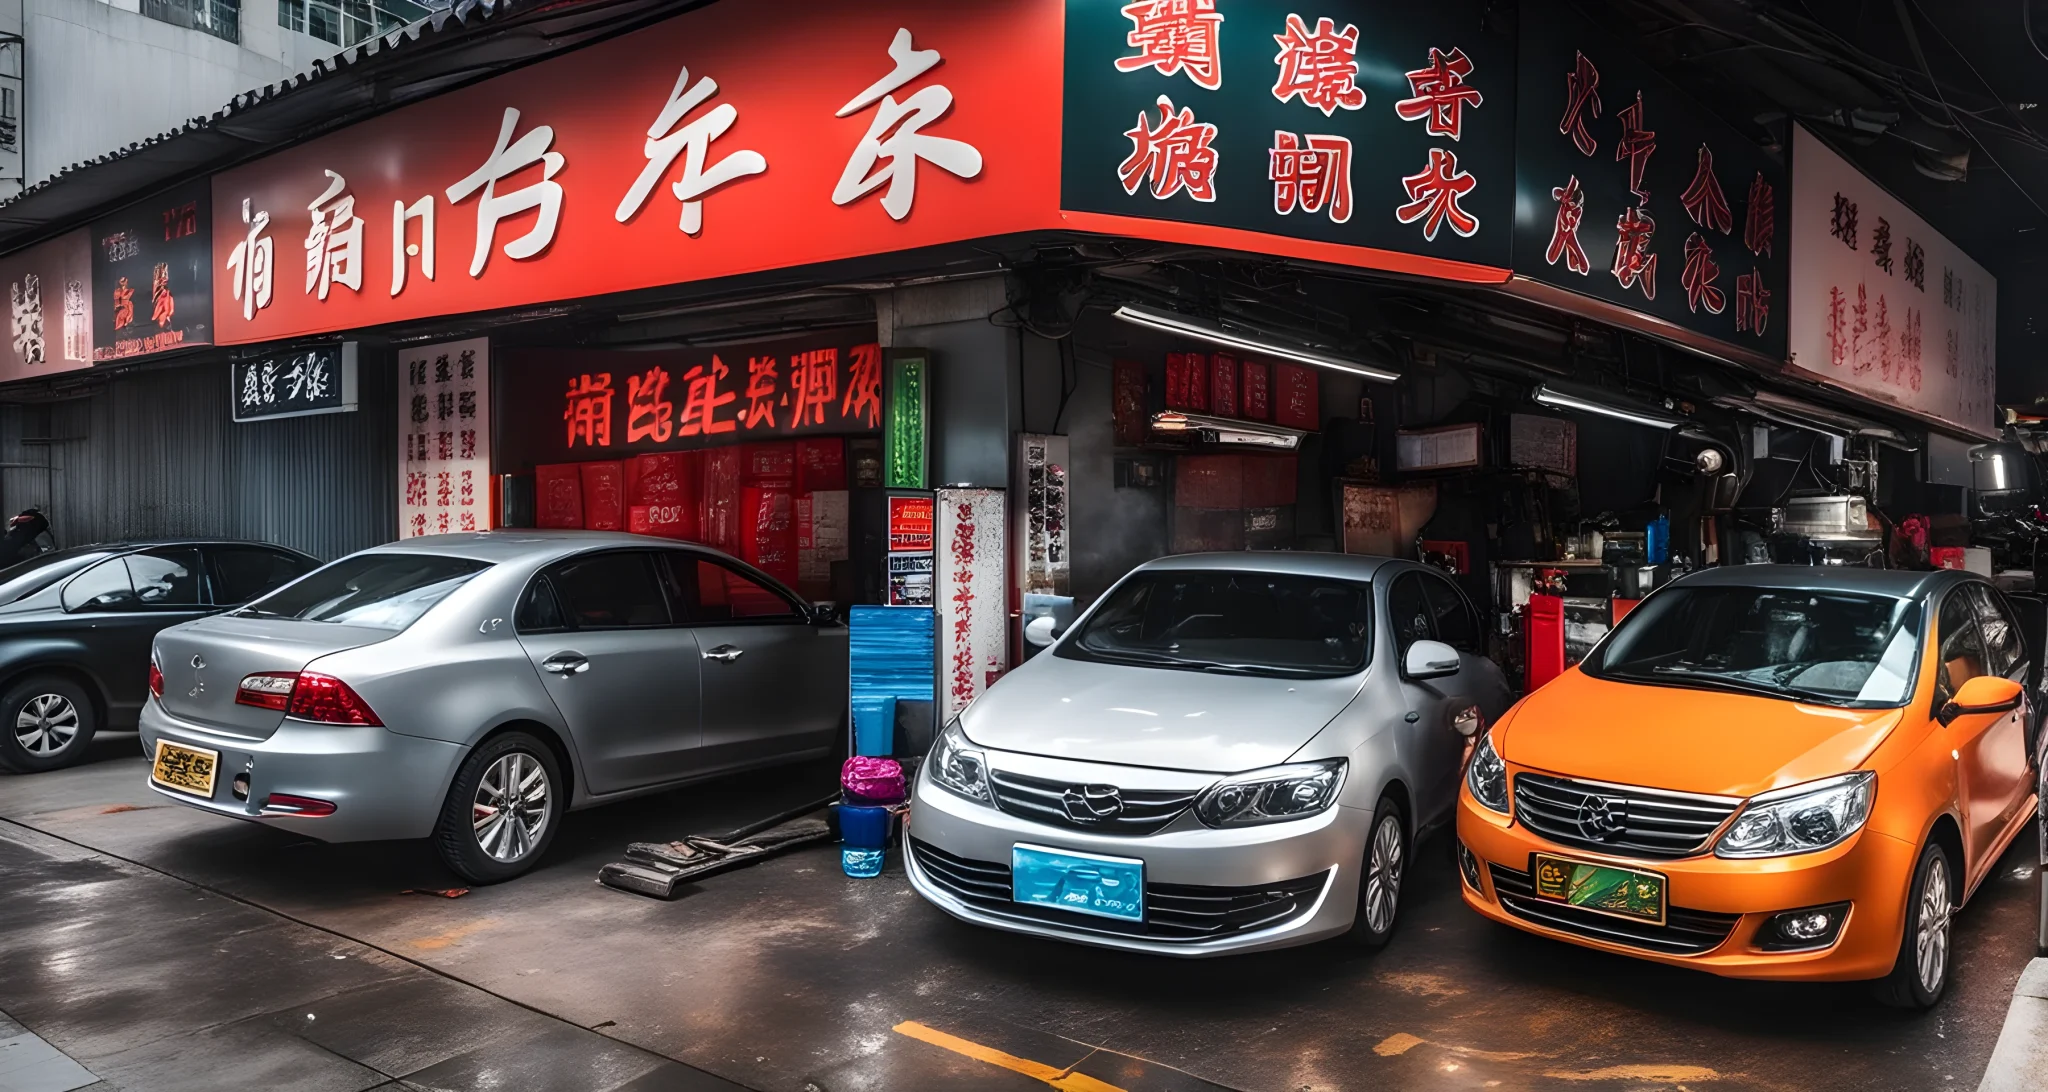 The image shows various car detailing and maintenance shops in a busy Chinese city, with signs and logos displayed prominently.